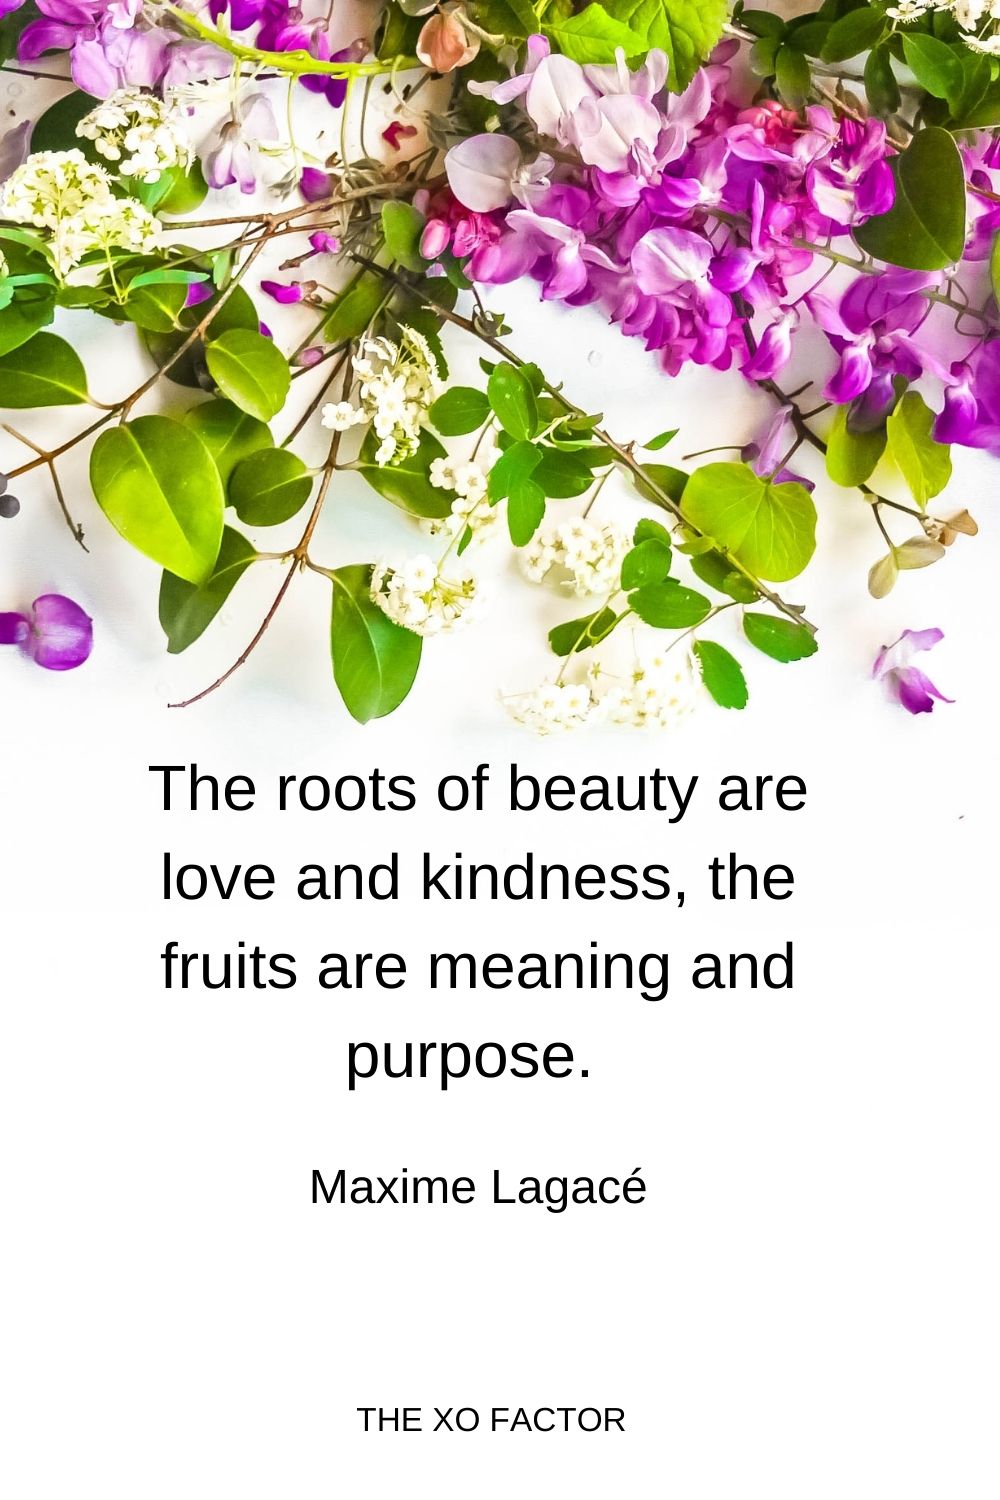 The roots of beauty are love and kindness, the fruits are meaning and purpose.  Maxime Lagacé